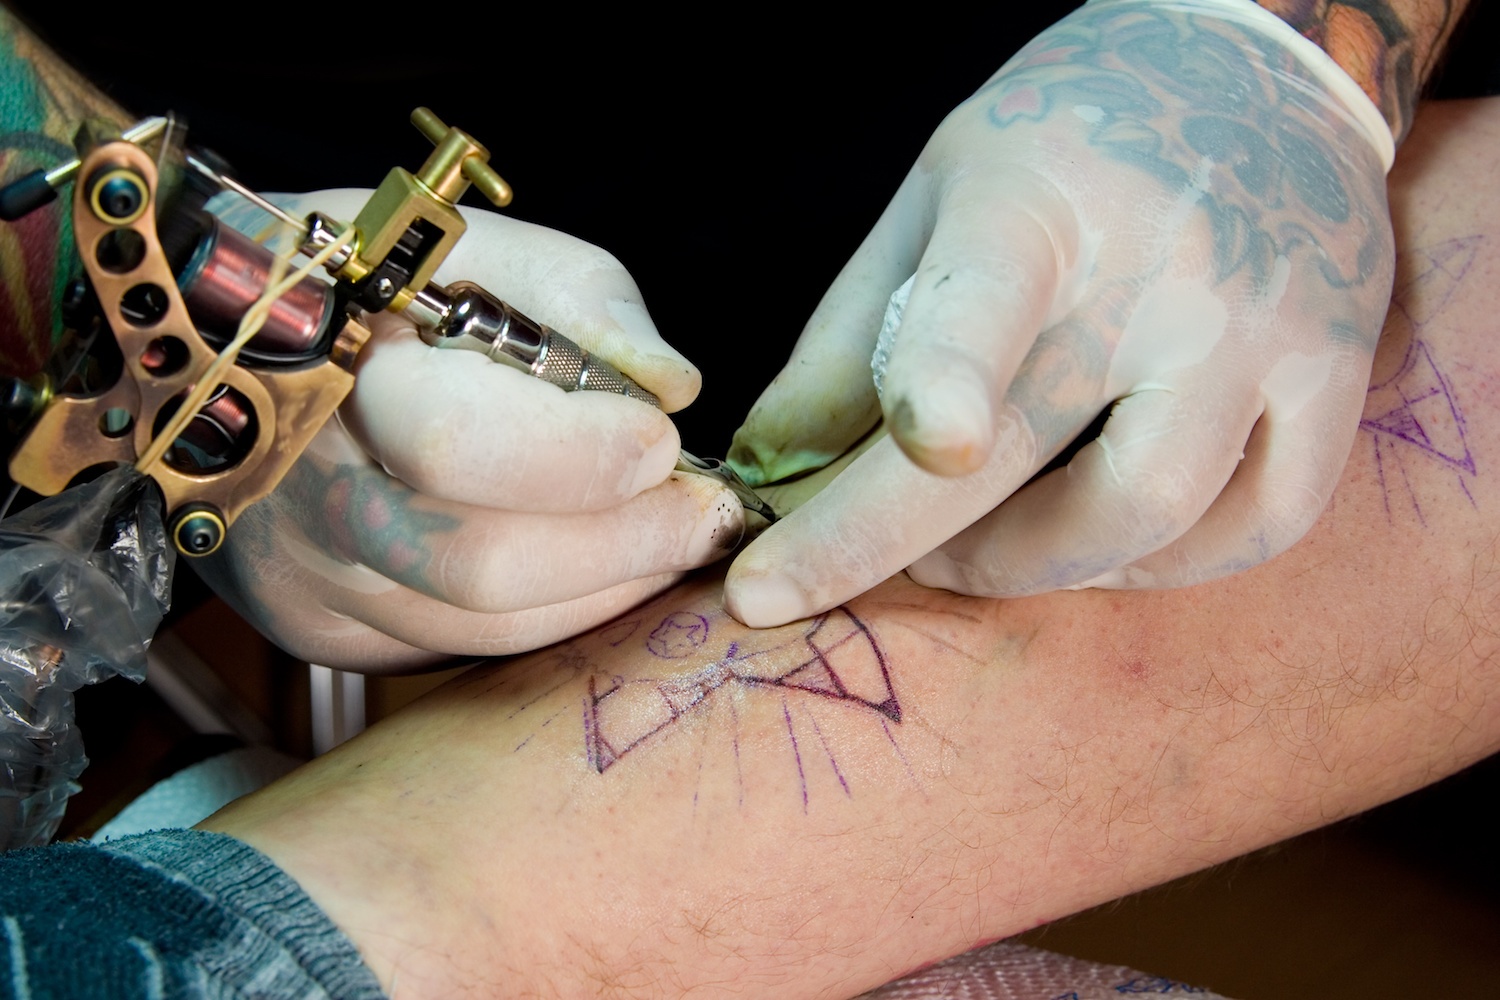 Infection control in body art and piercing clinics